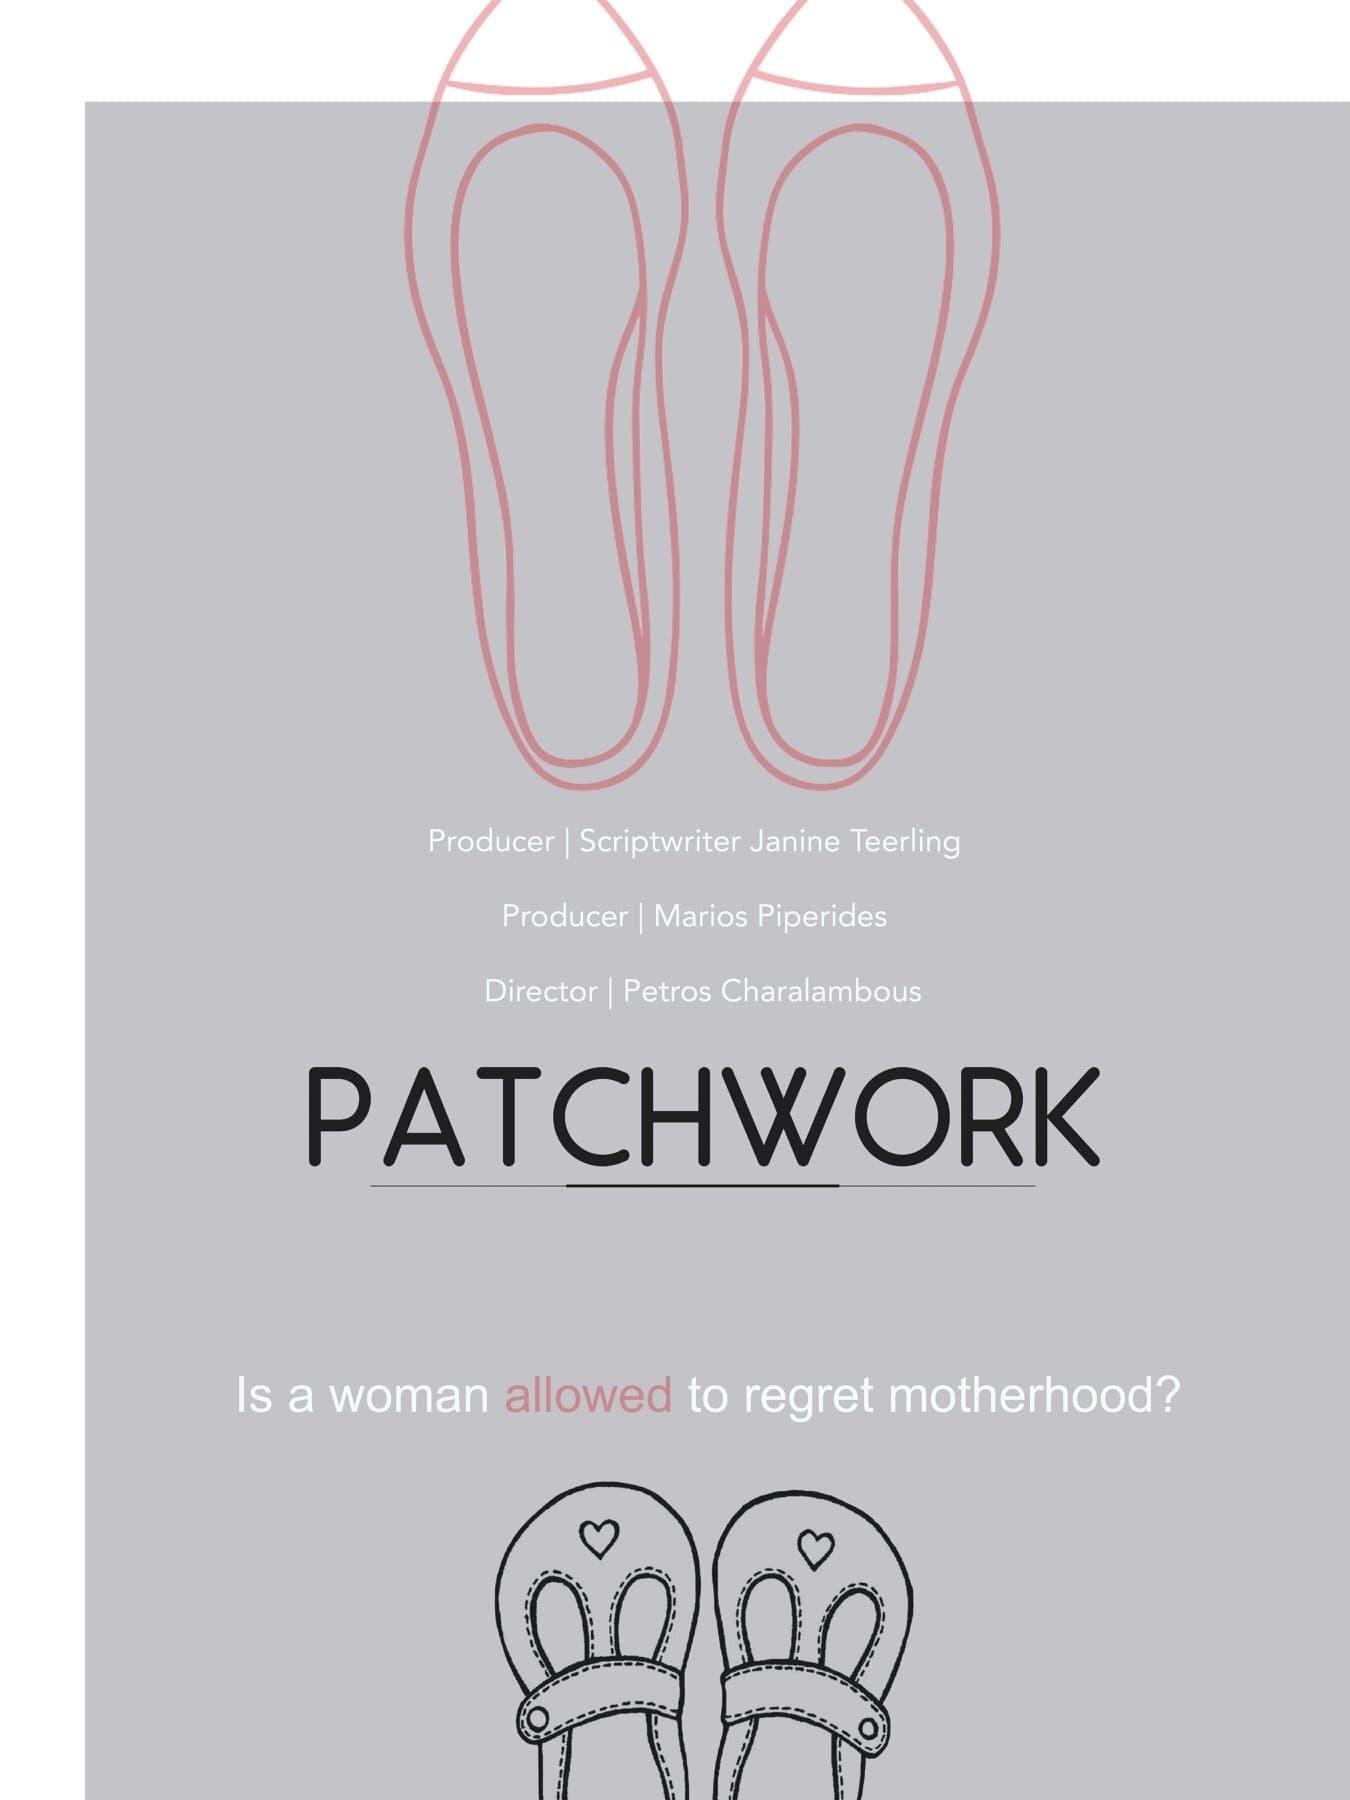 Patchwork poster